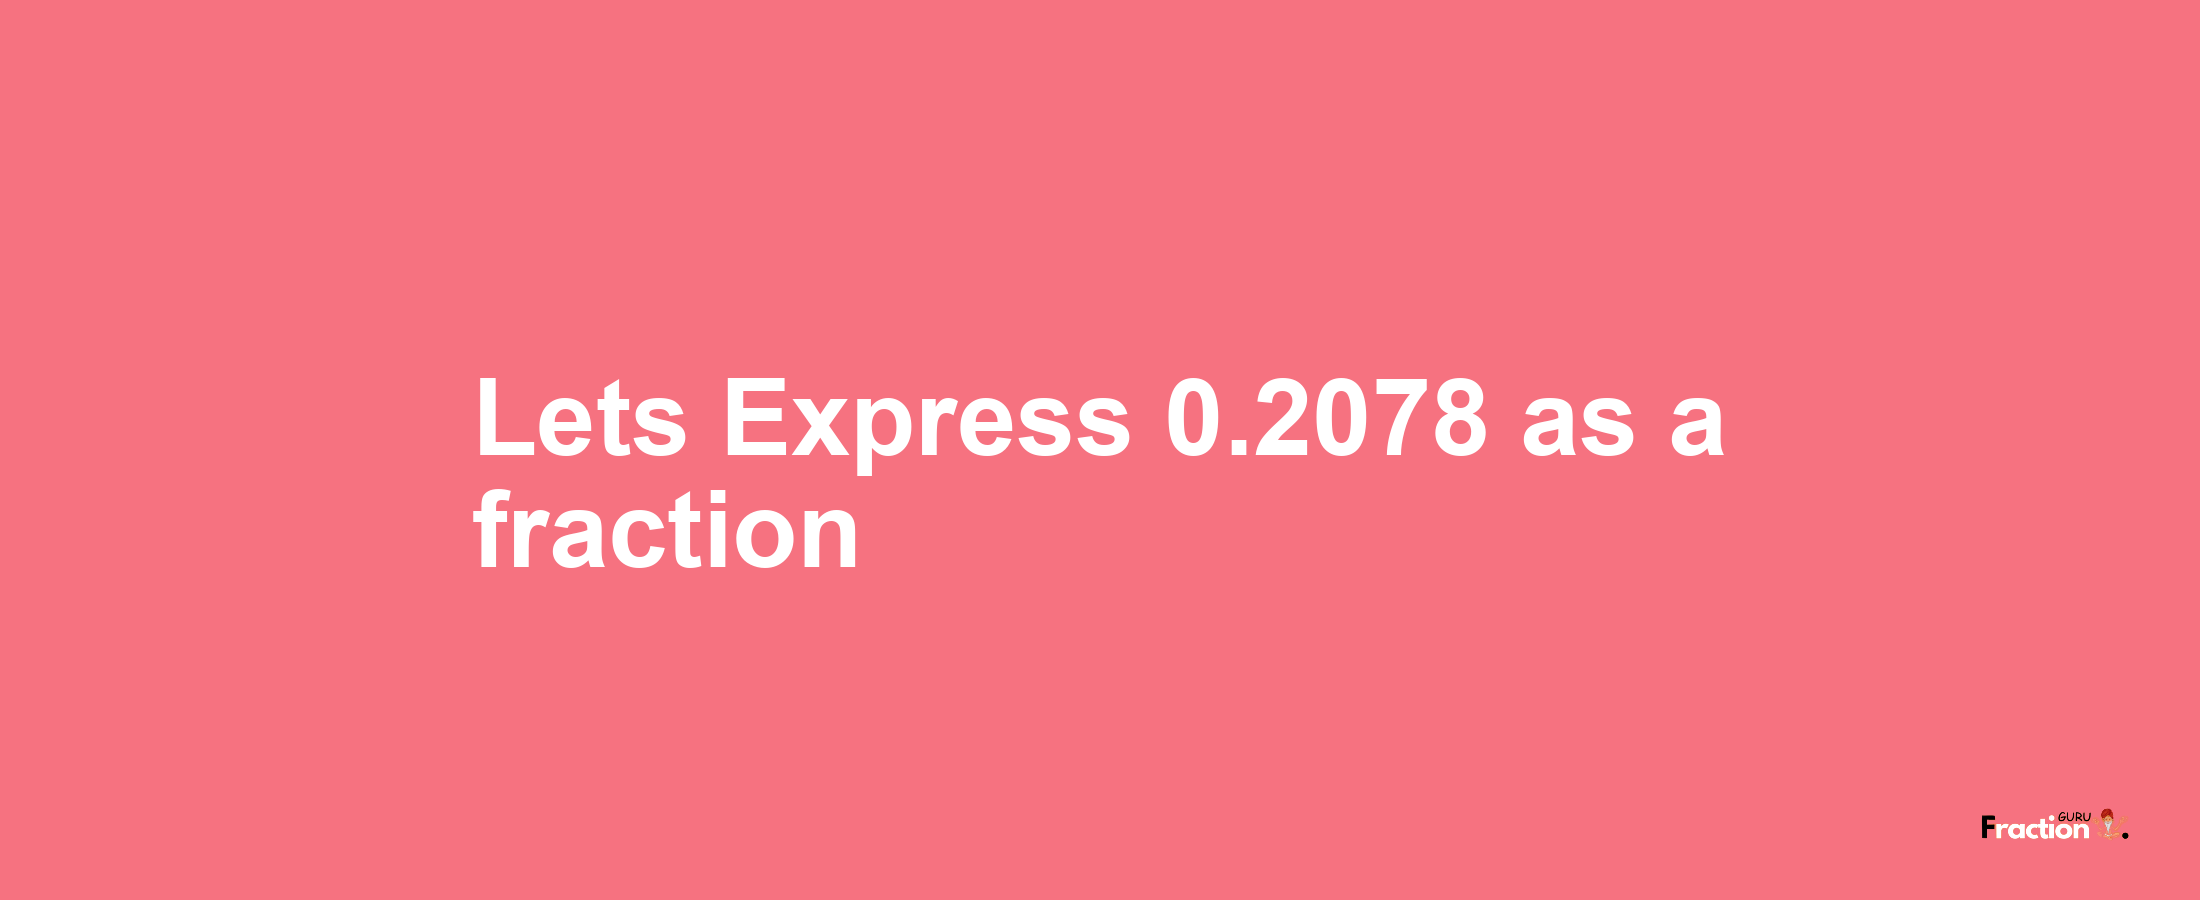 Lets Express 0.2078 as afraction